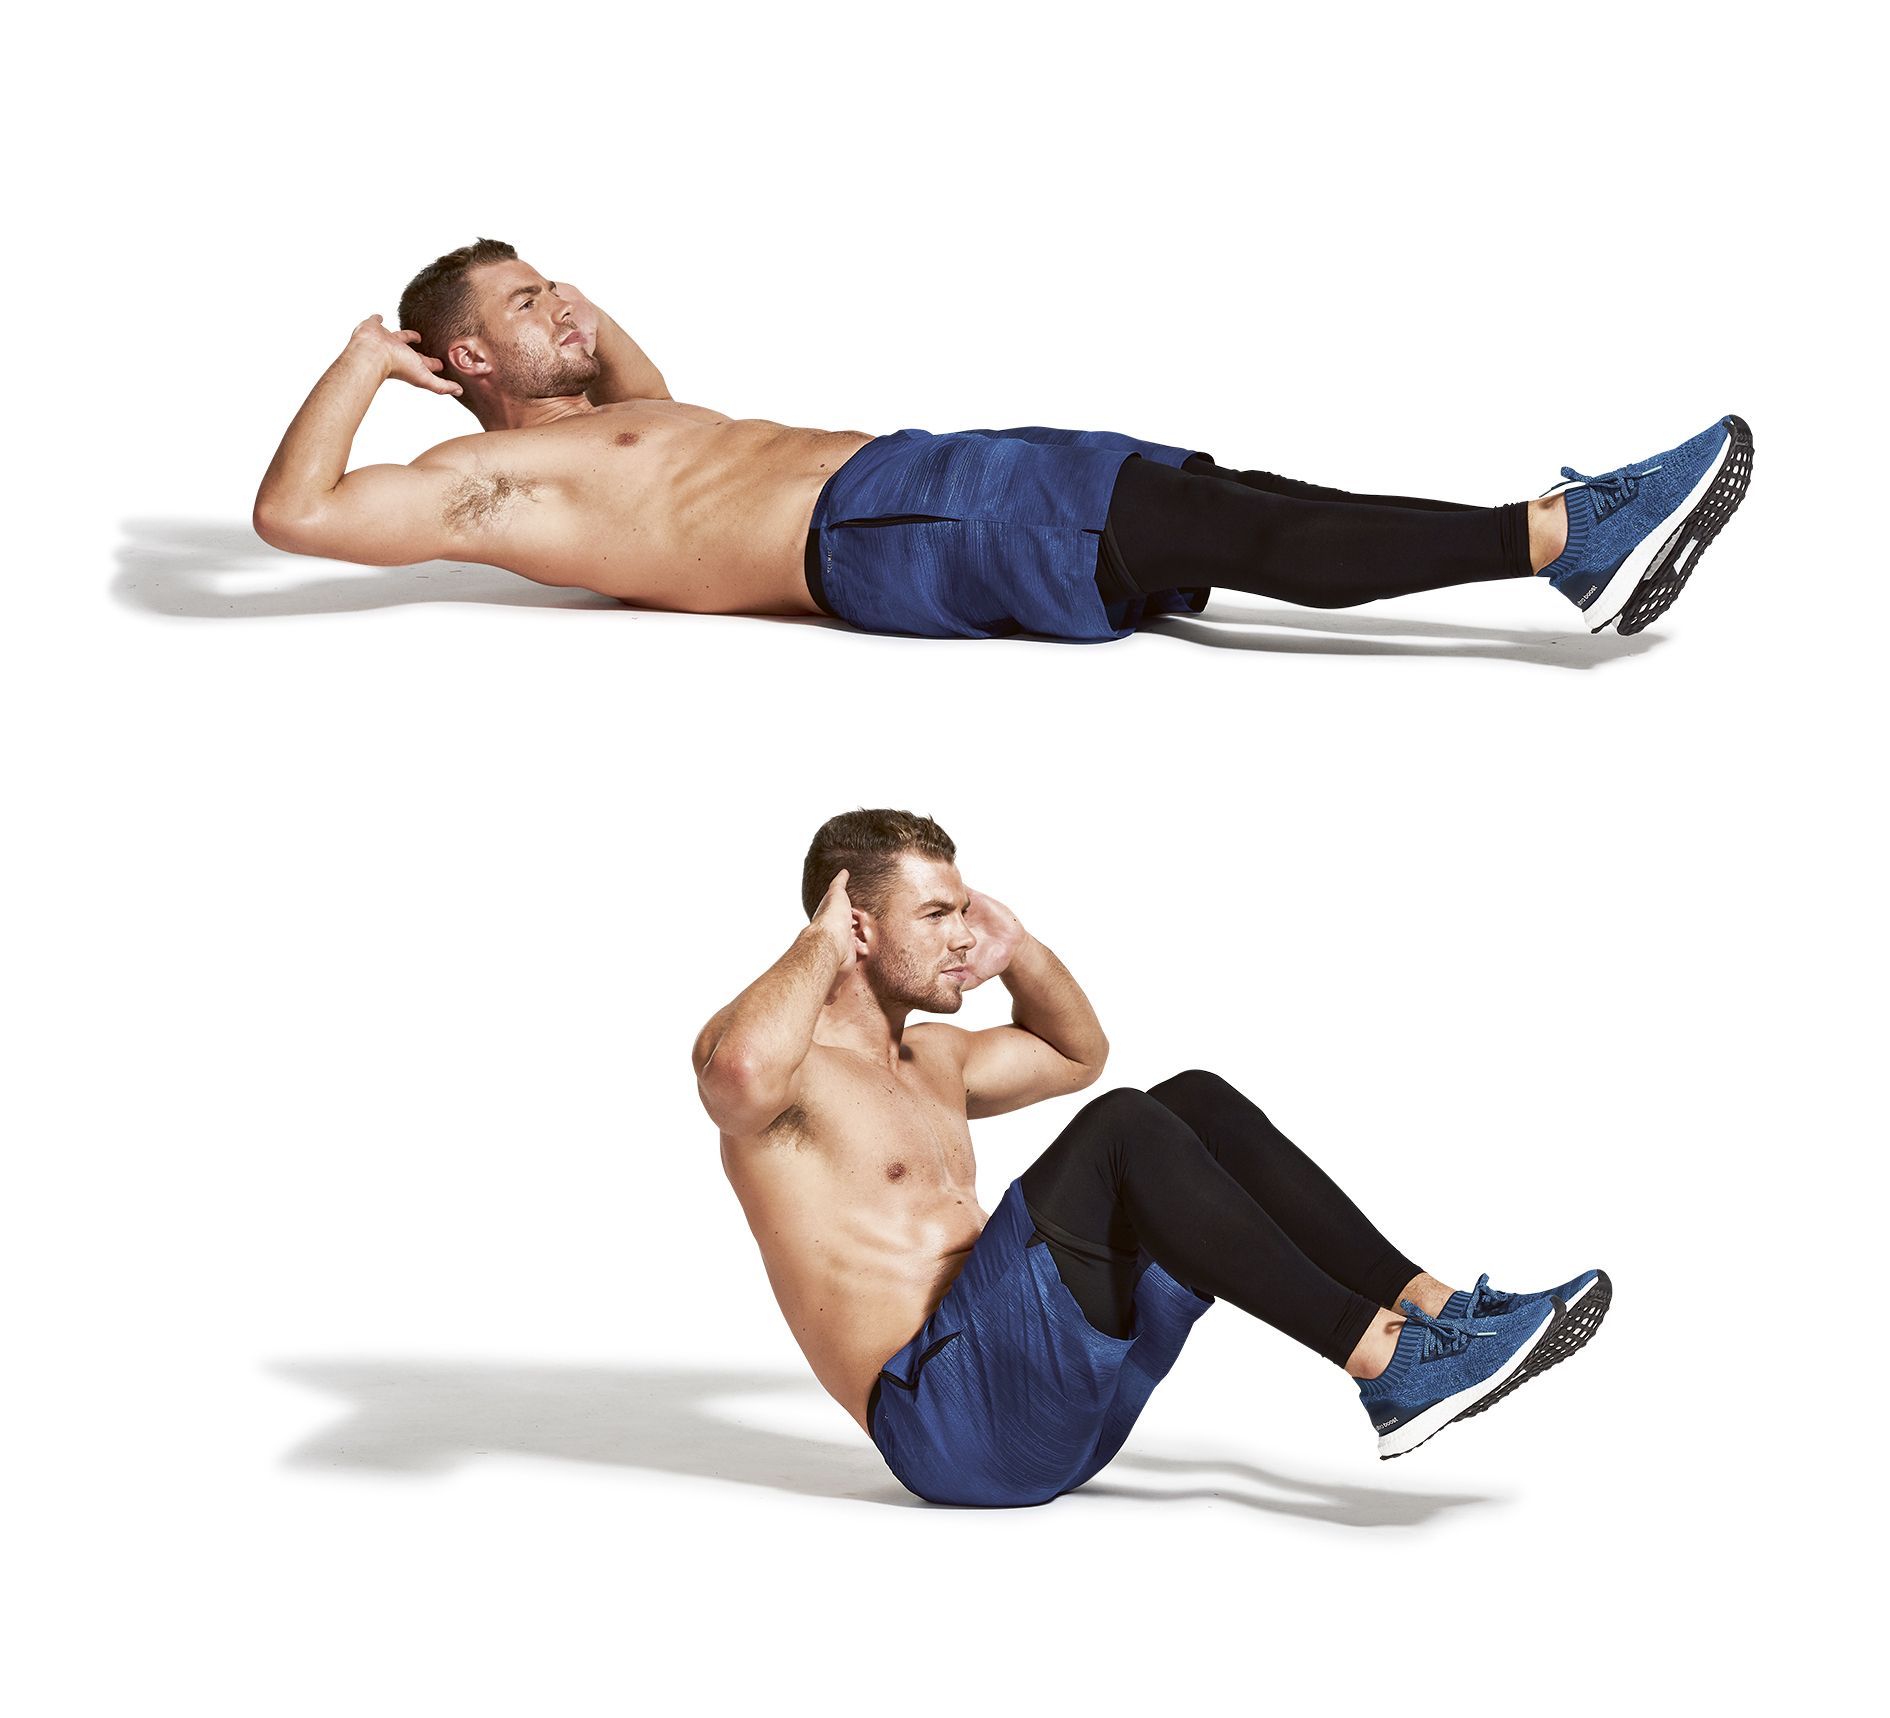 Men's Health The Six-Pack Secret: Sculpt Rock-Hard Abs with the